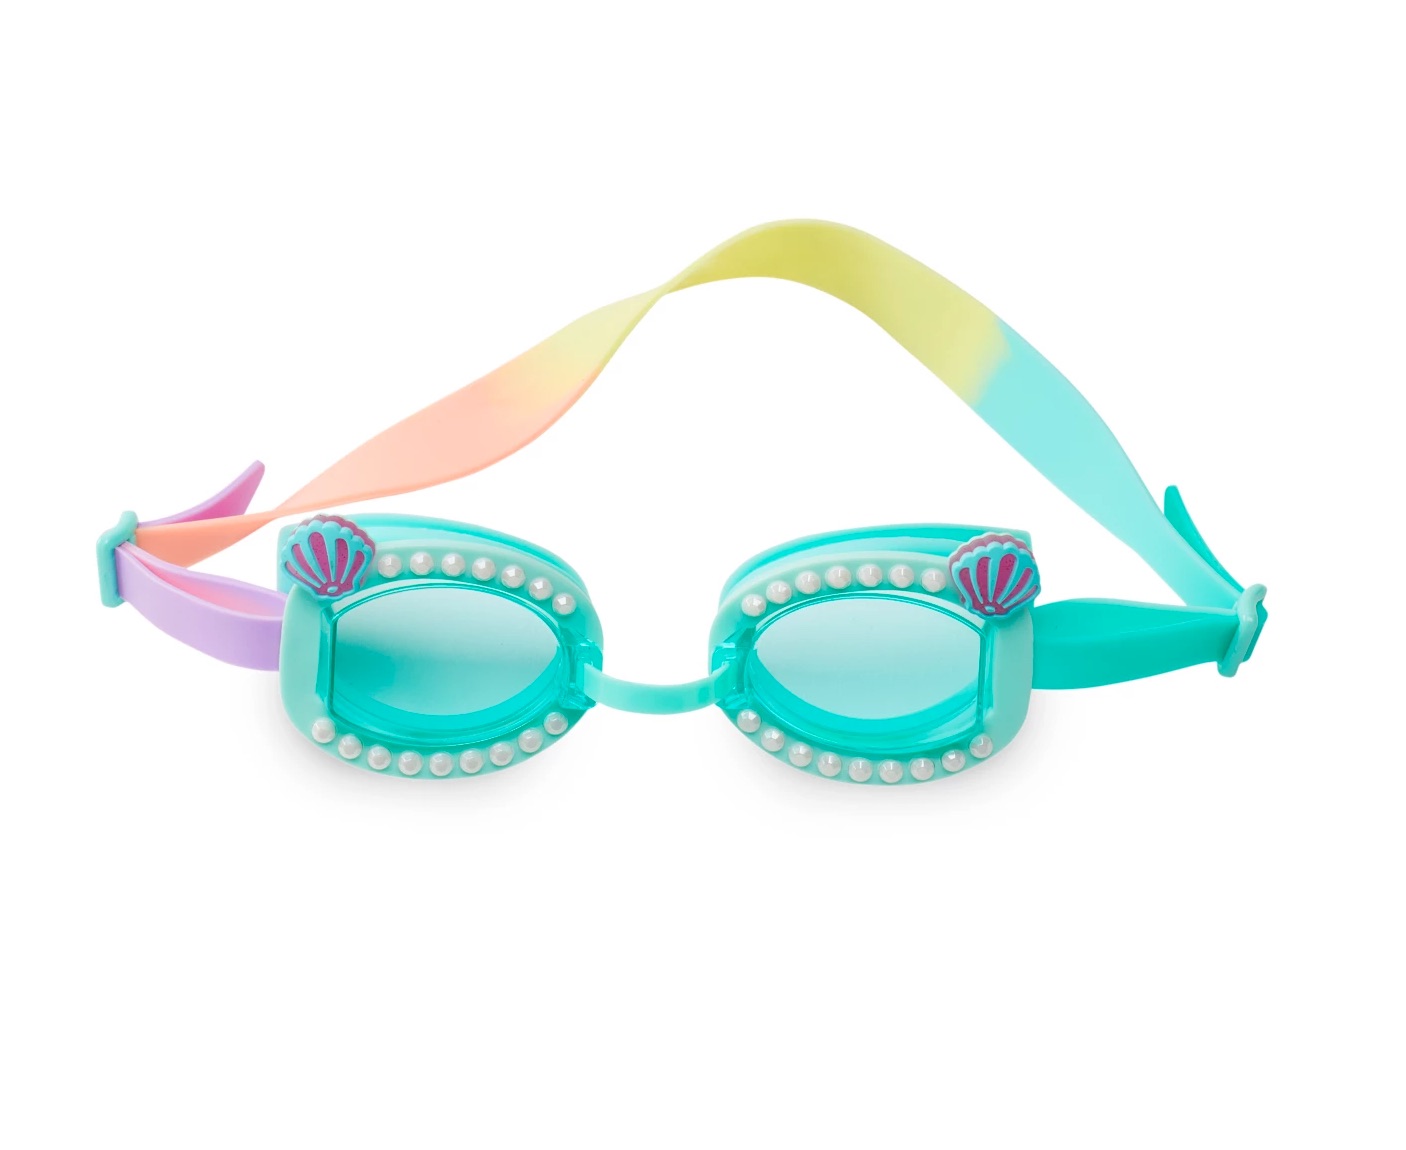 Bling swim goggles for kids: Ariel goggles at Disney, because pearls are always classic right?